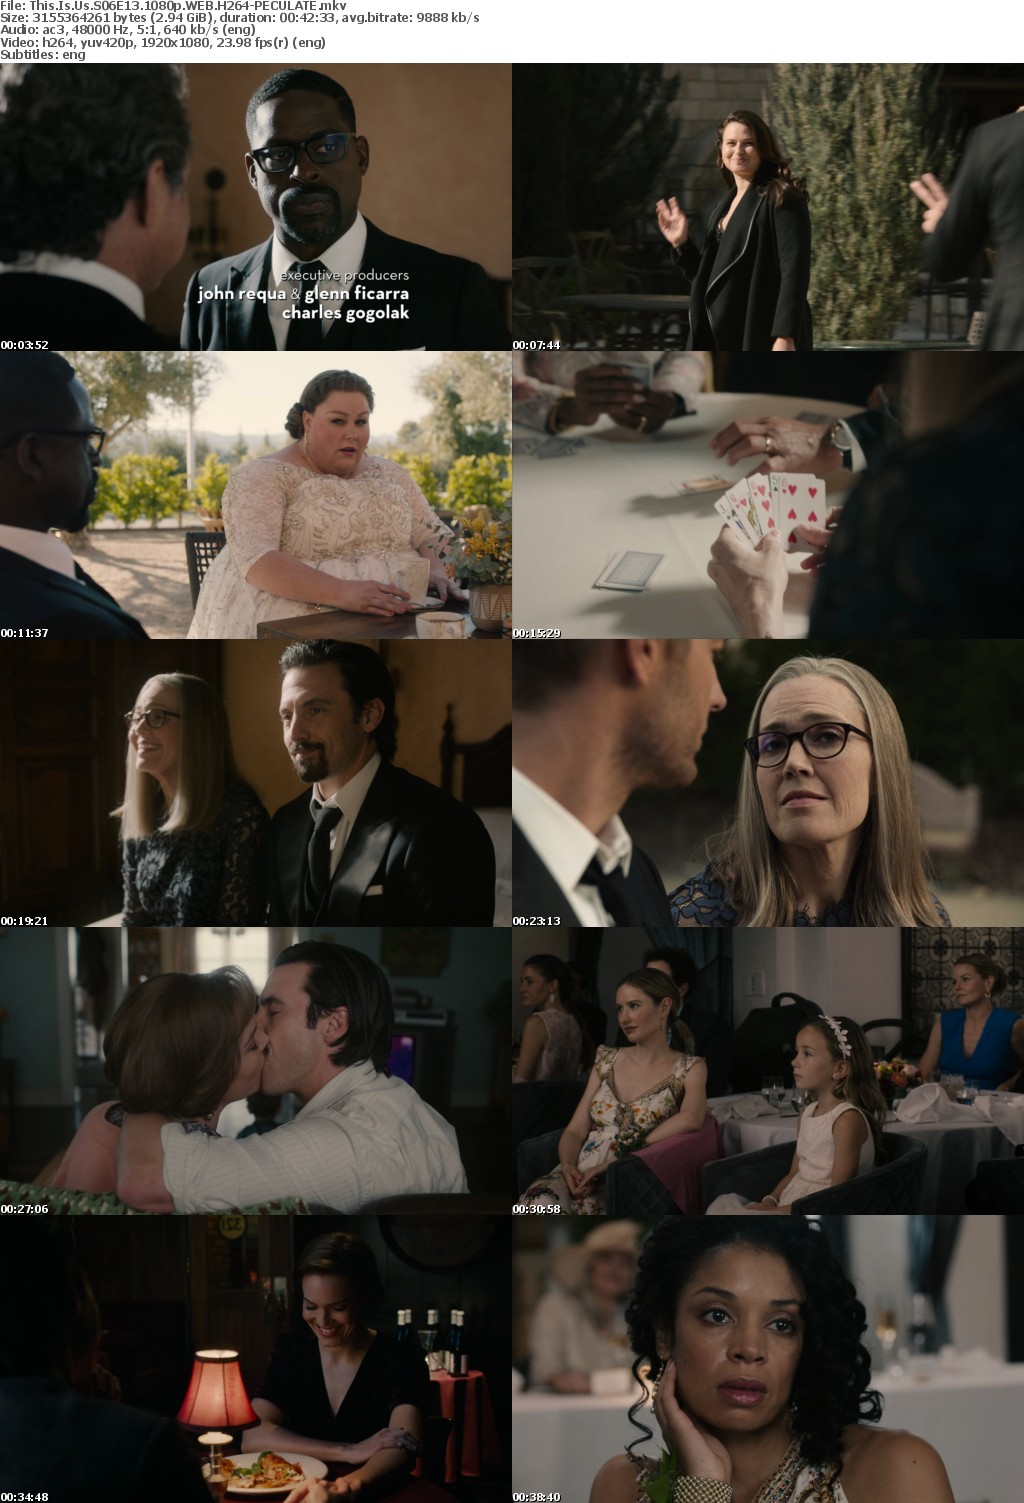 This Is Us S06E13 1080p WEB H264-PECULATE